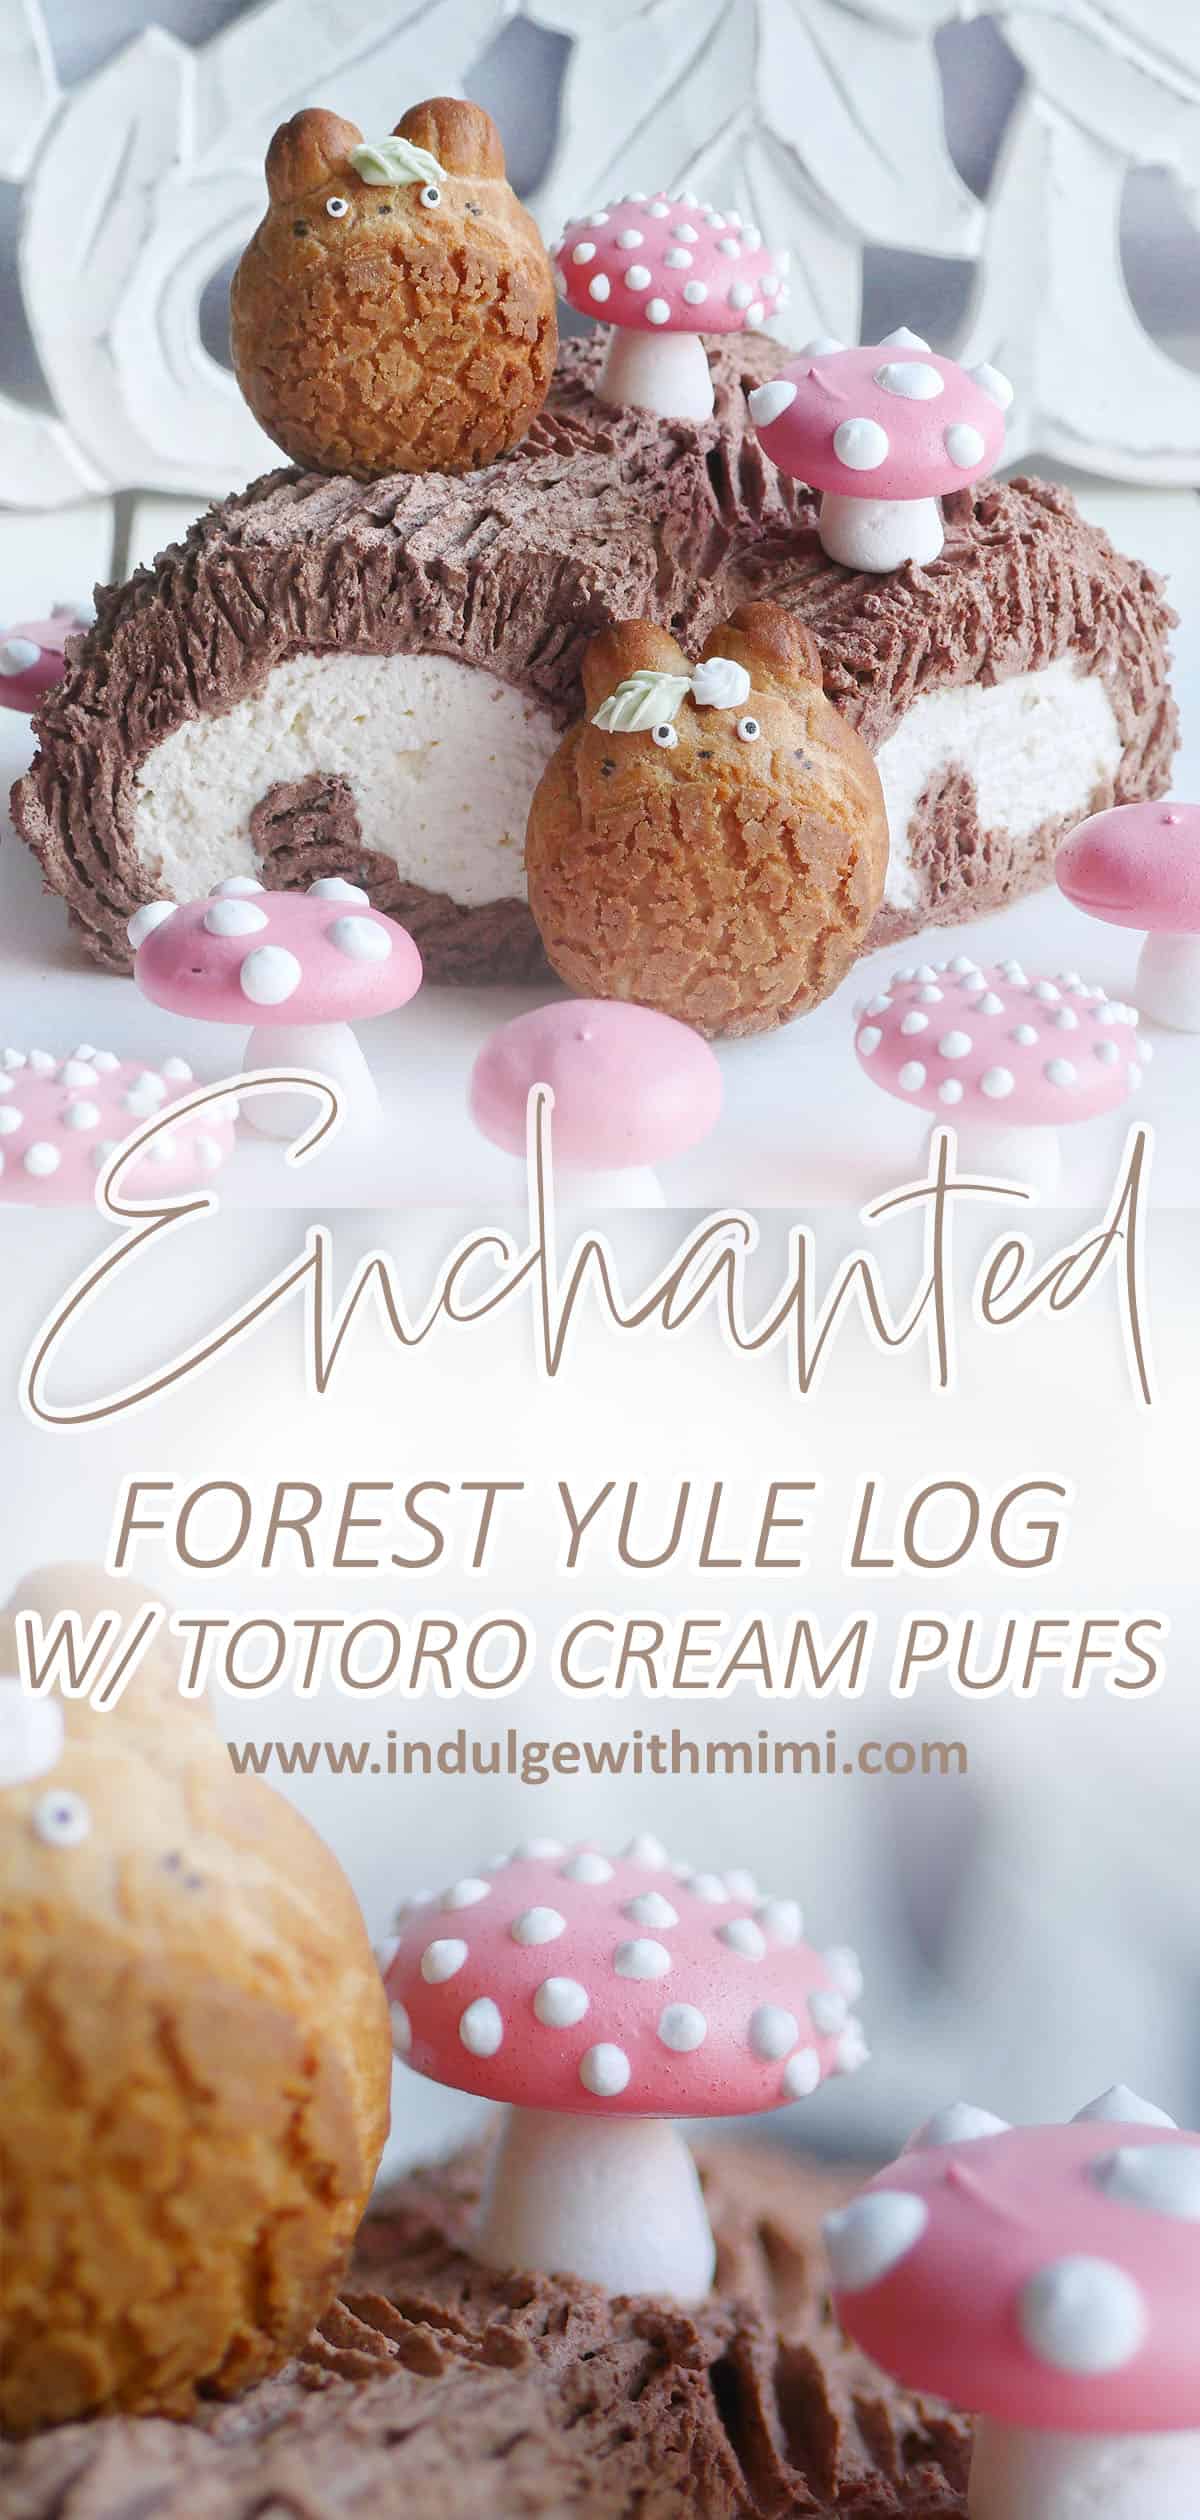 Enchanted Forest yule log with Totoro cream puffs on the side. 